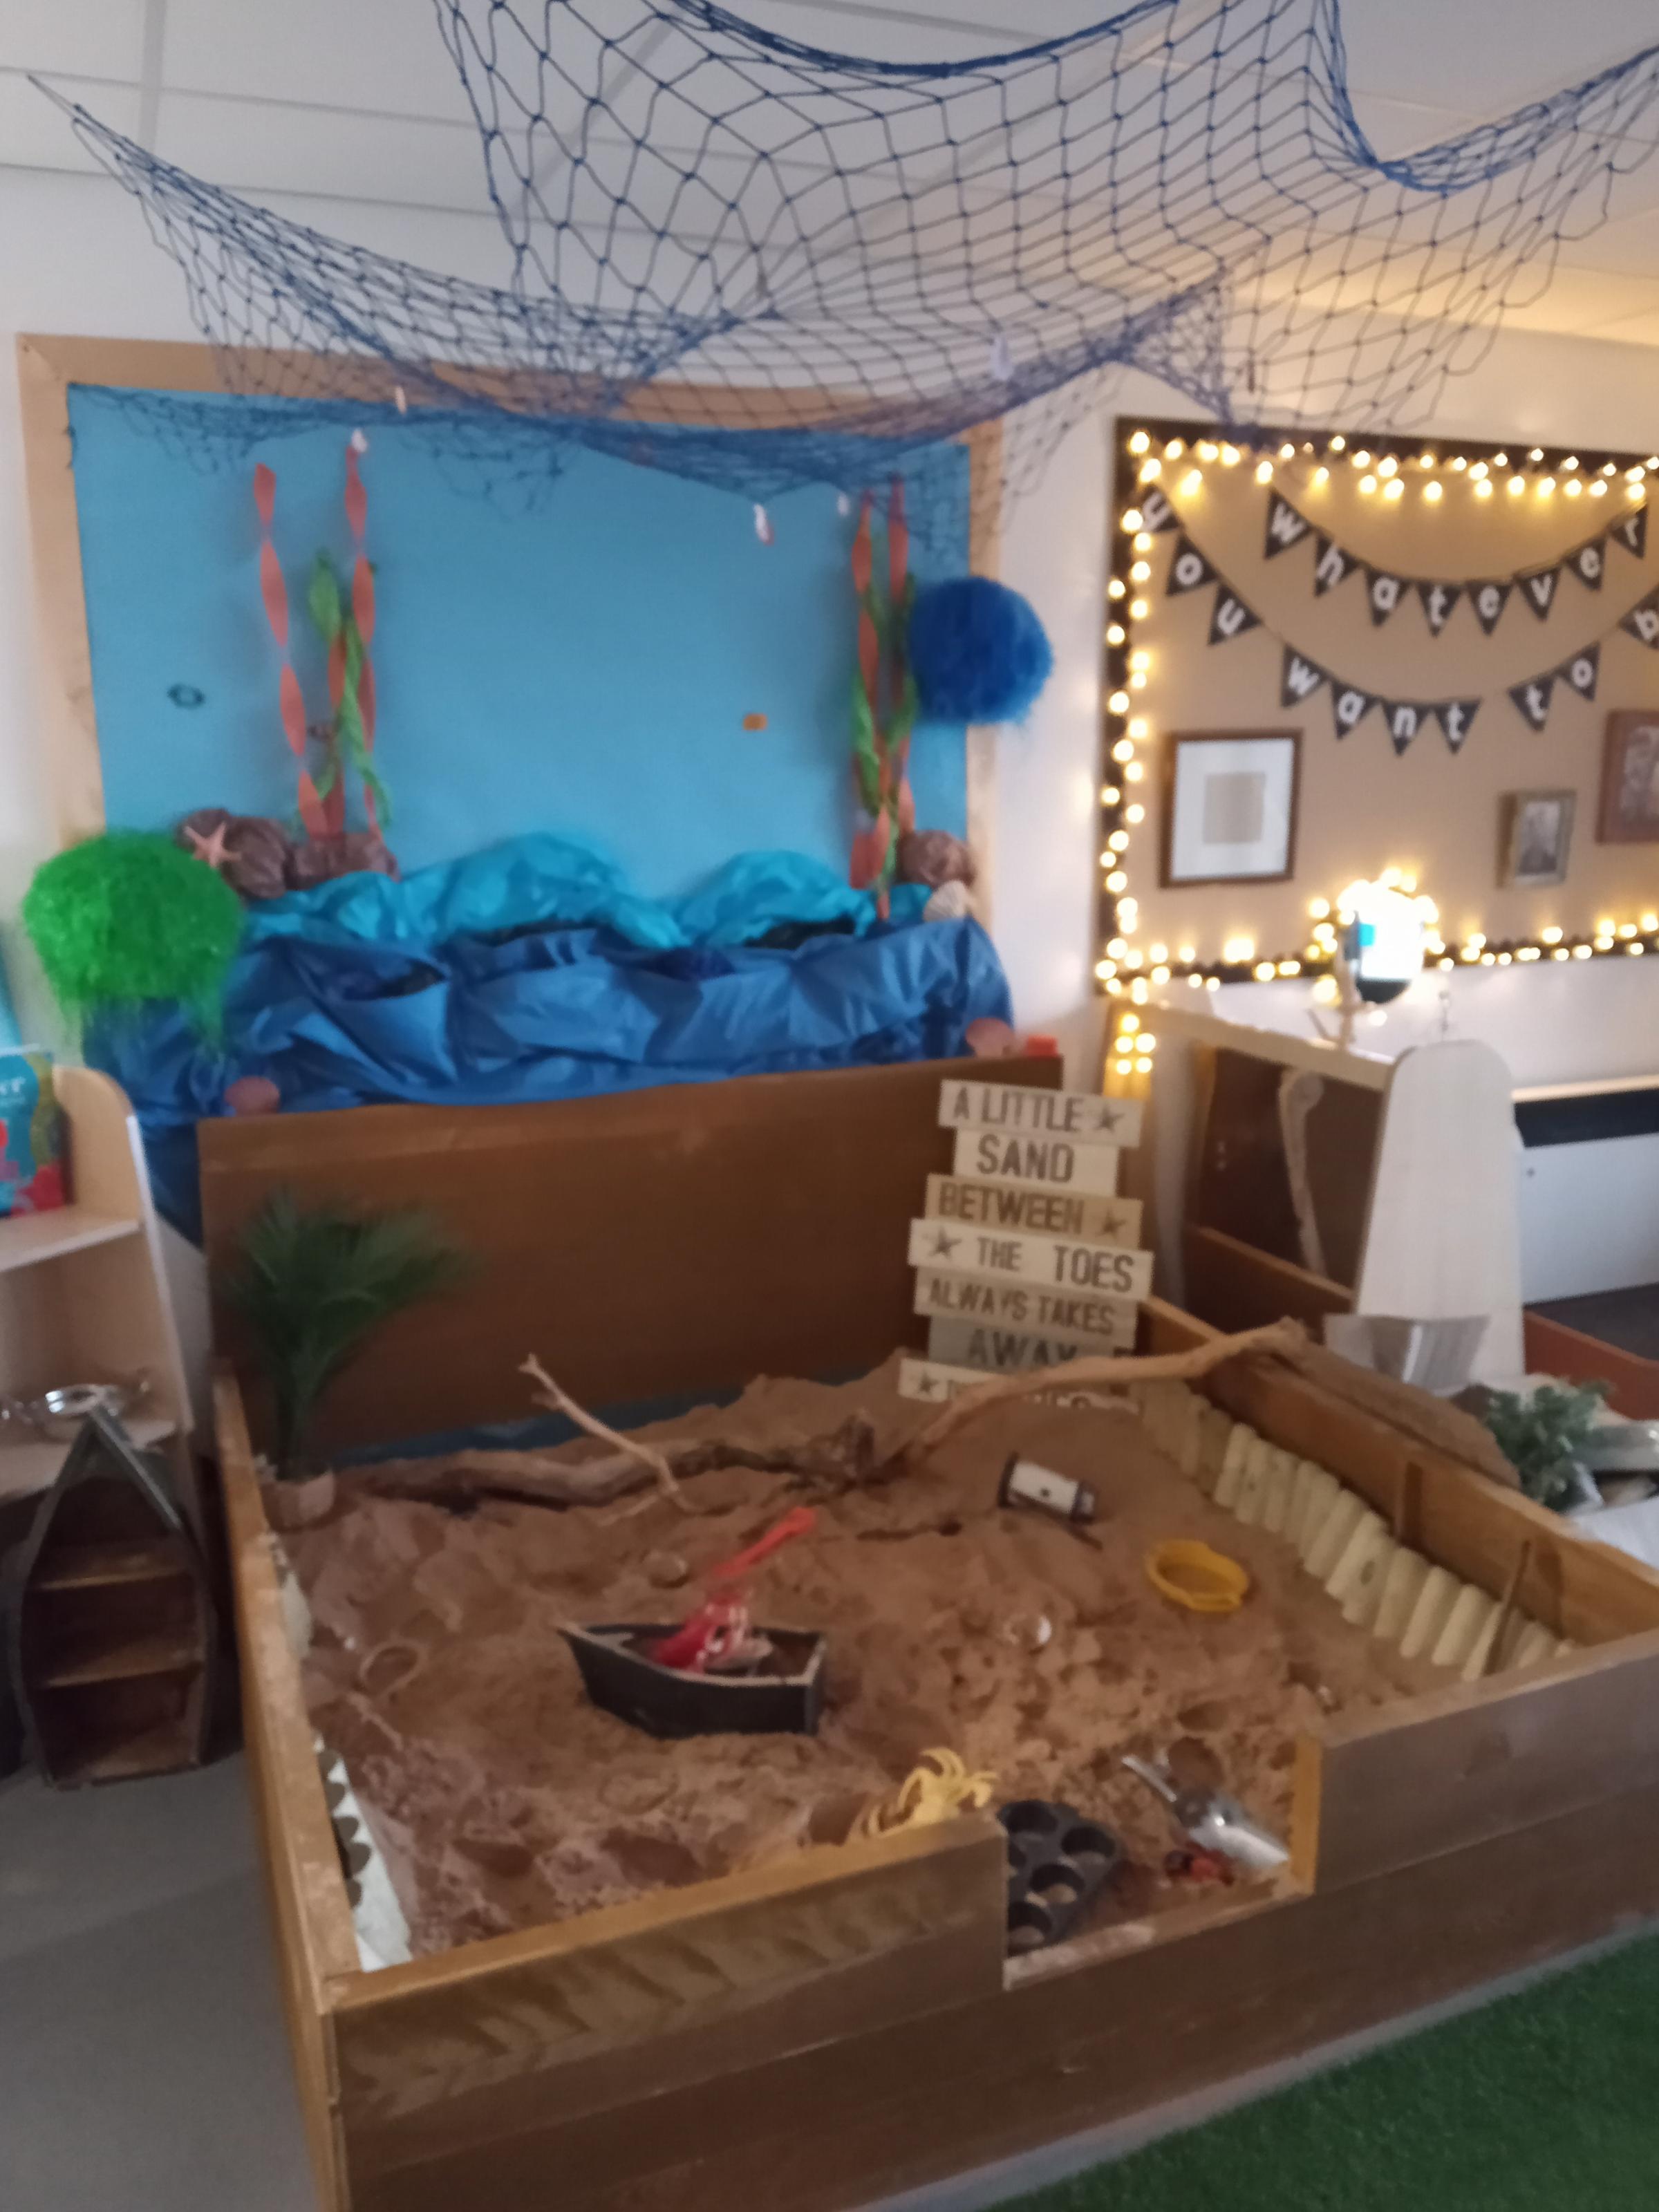 A seaside theme for one of the Early Years areas in Borras Park Primary School.